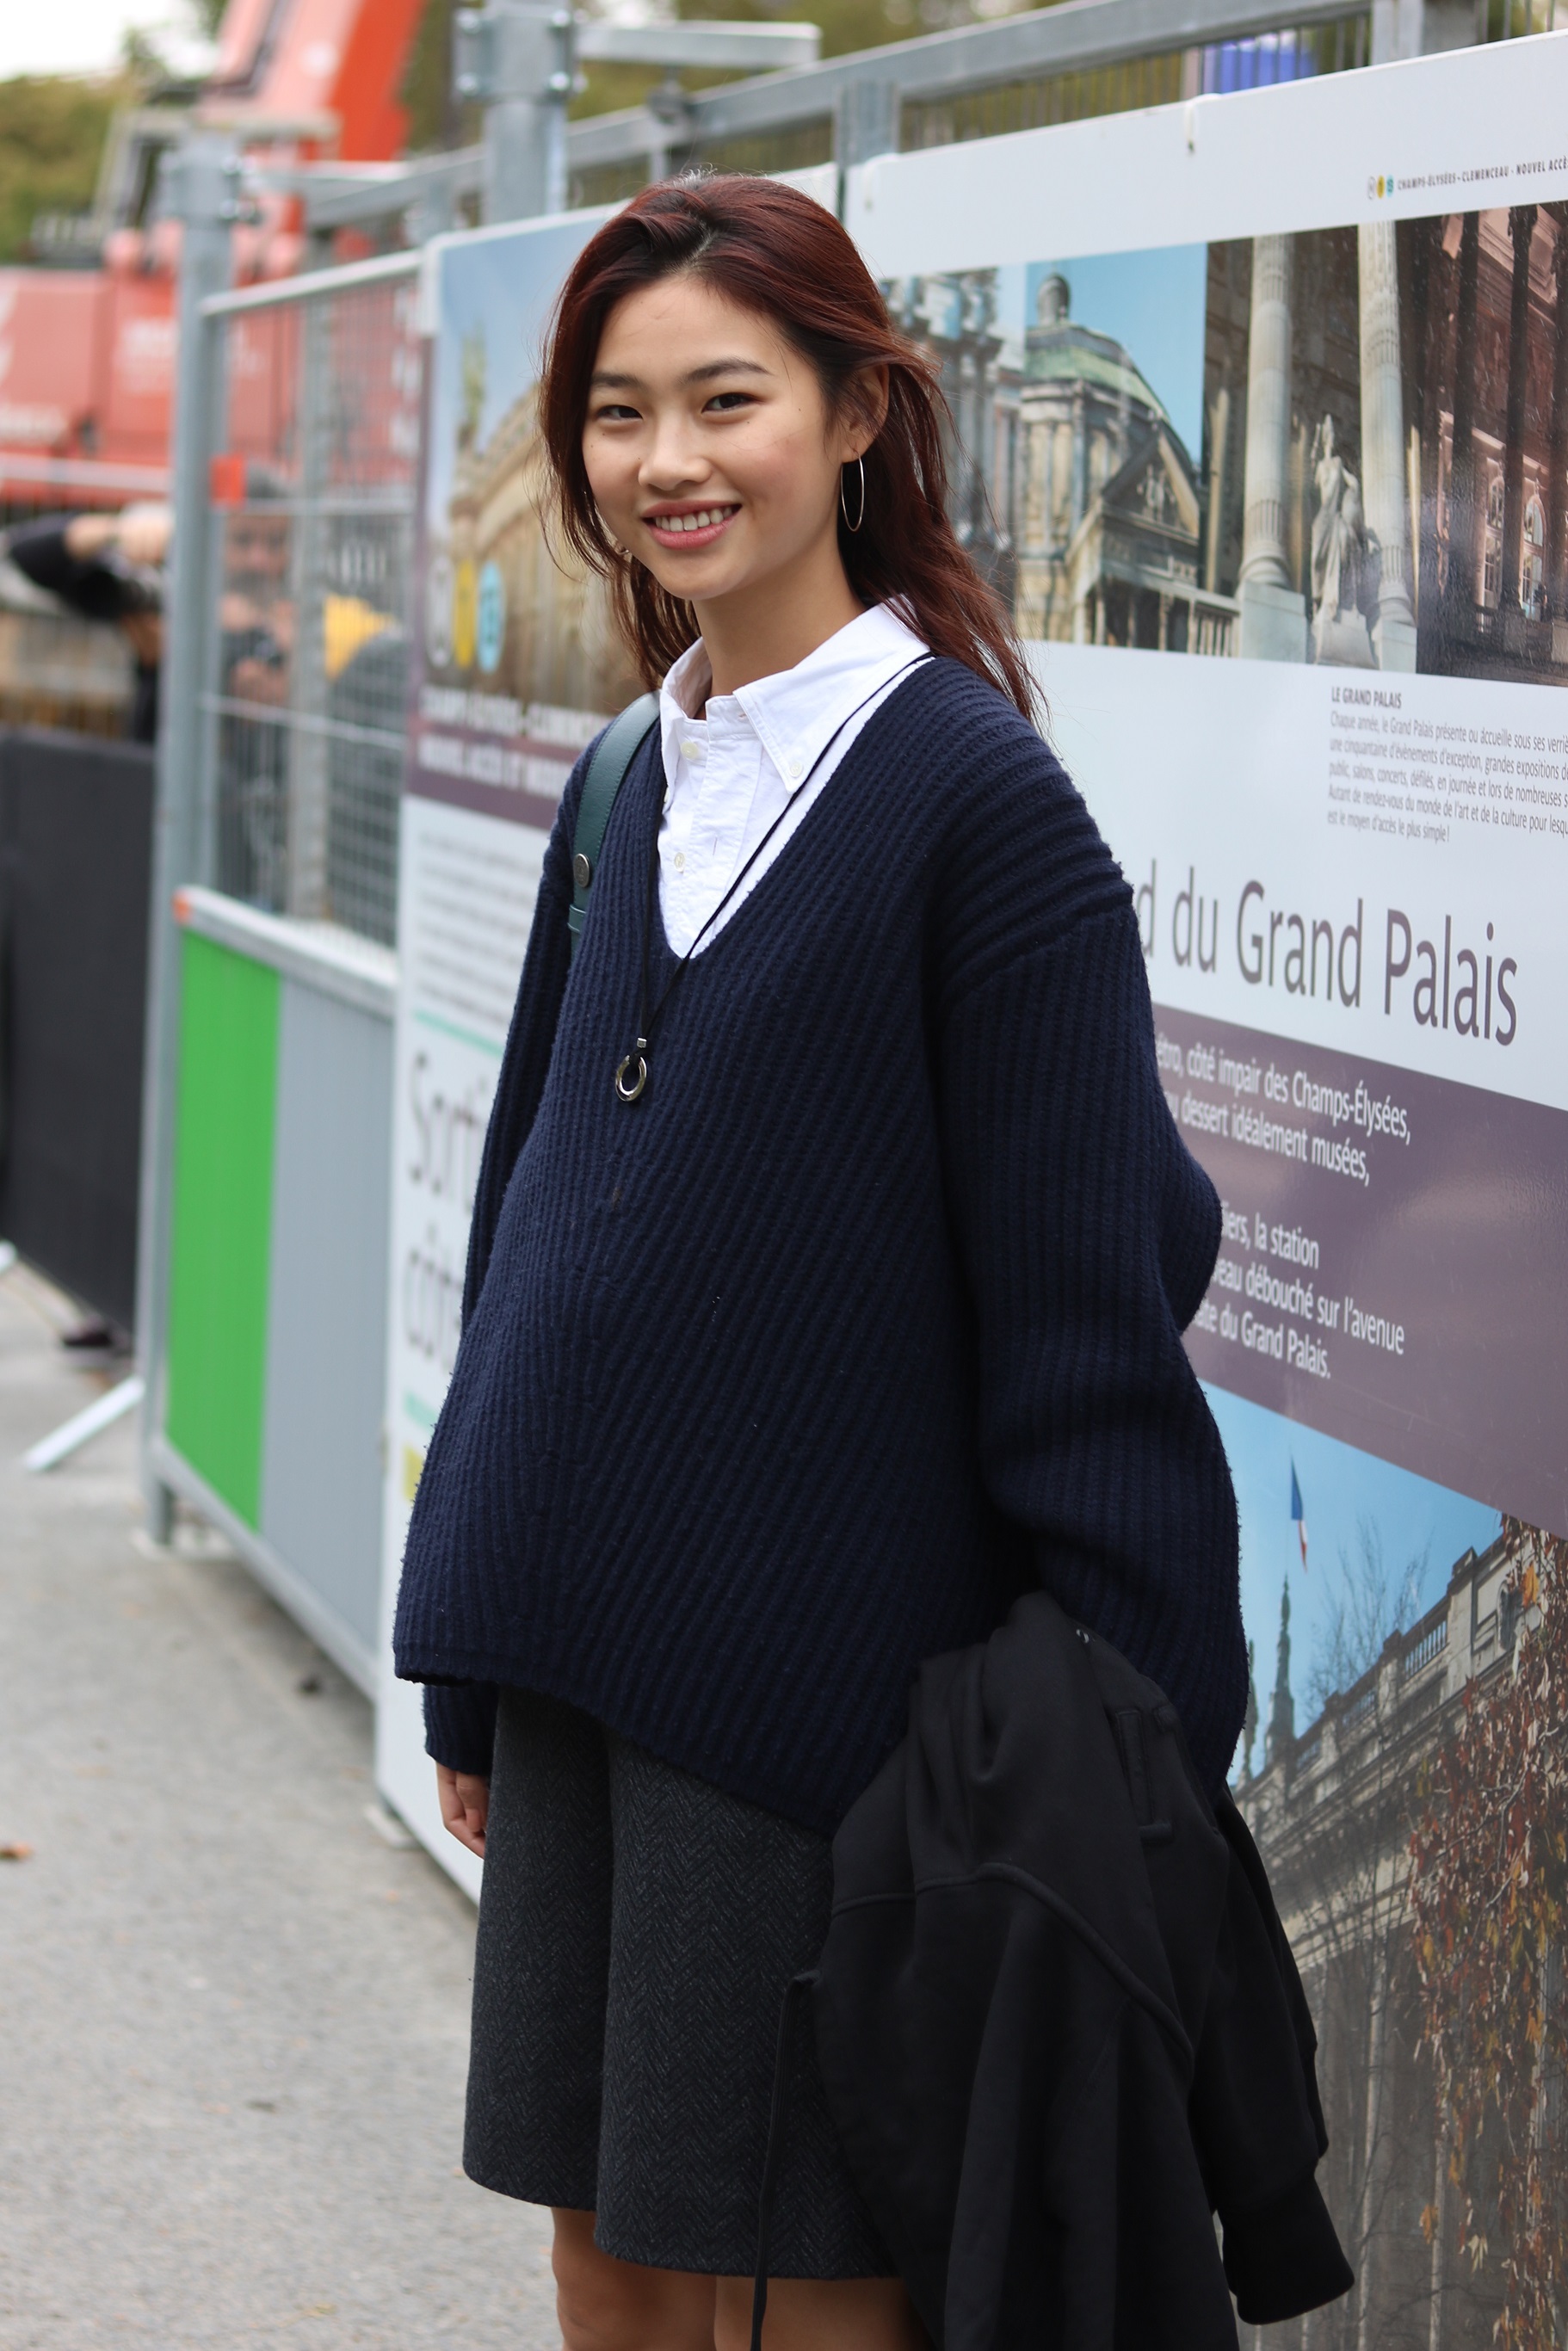 Hoyeon Jung after Chanel S/S 19 – THE MODEL SPOTTER